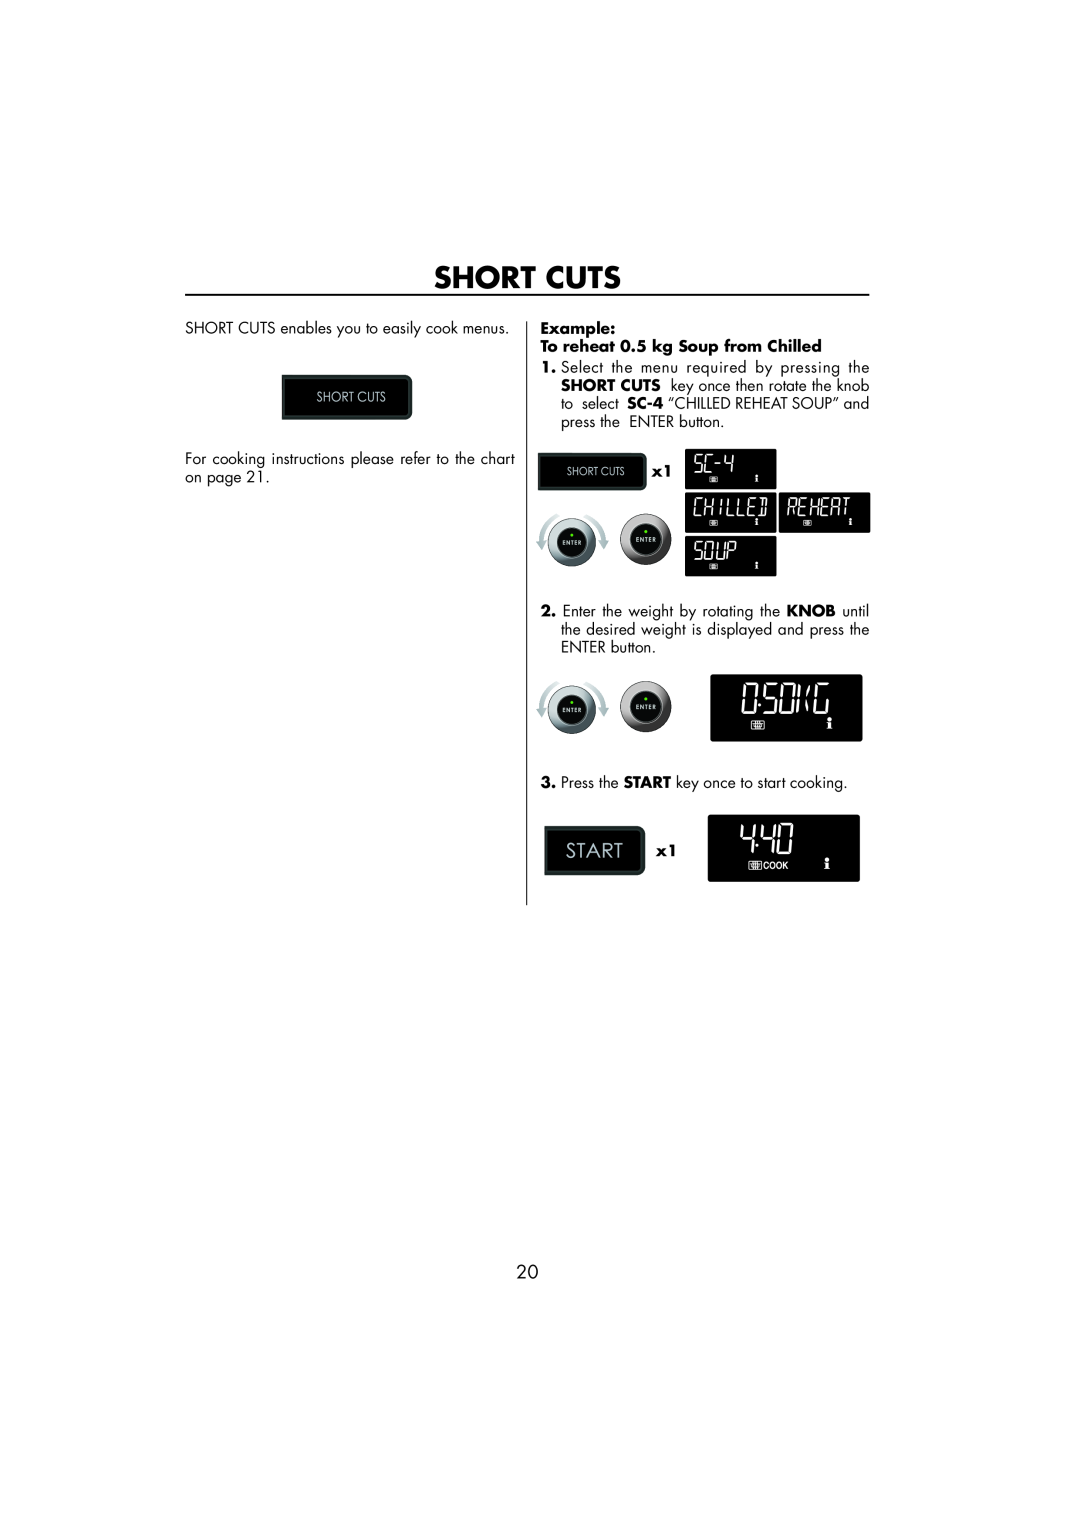 Sharp R-890SLM operation manual Short Cuts, Example To reheat 0.5 kg Soup from Chilled 